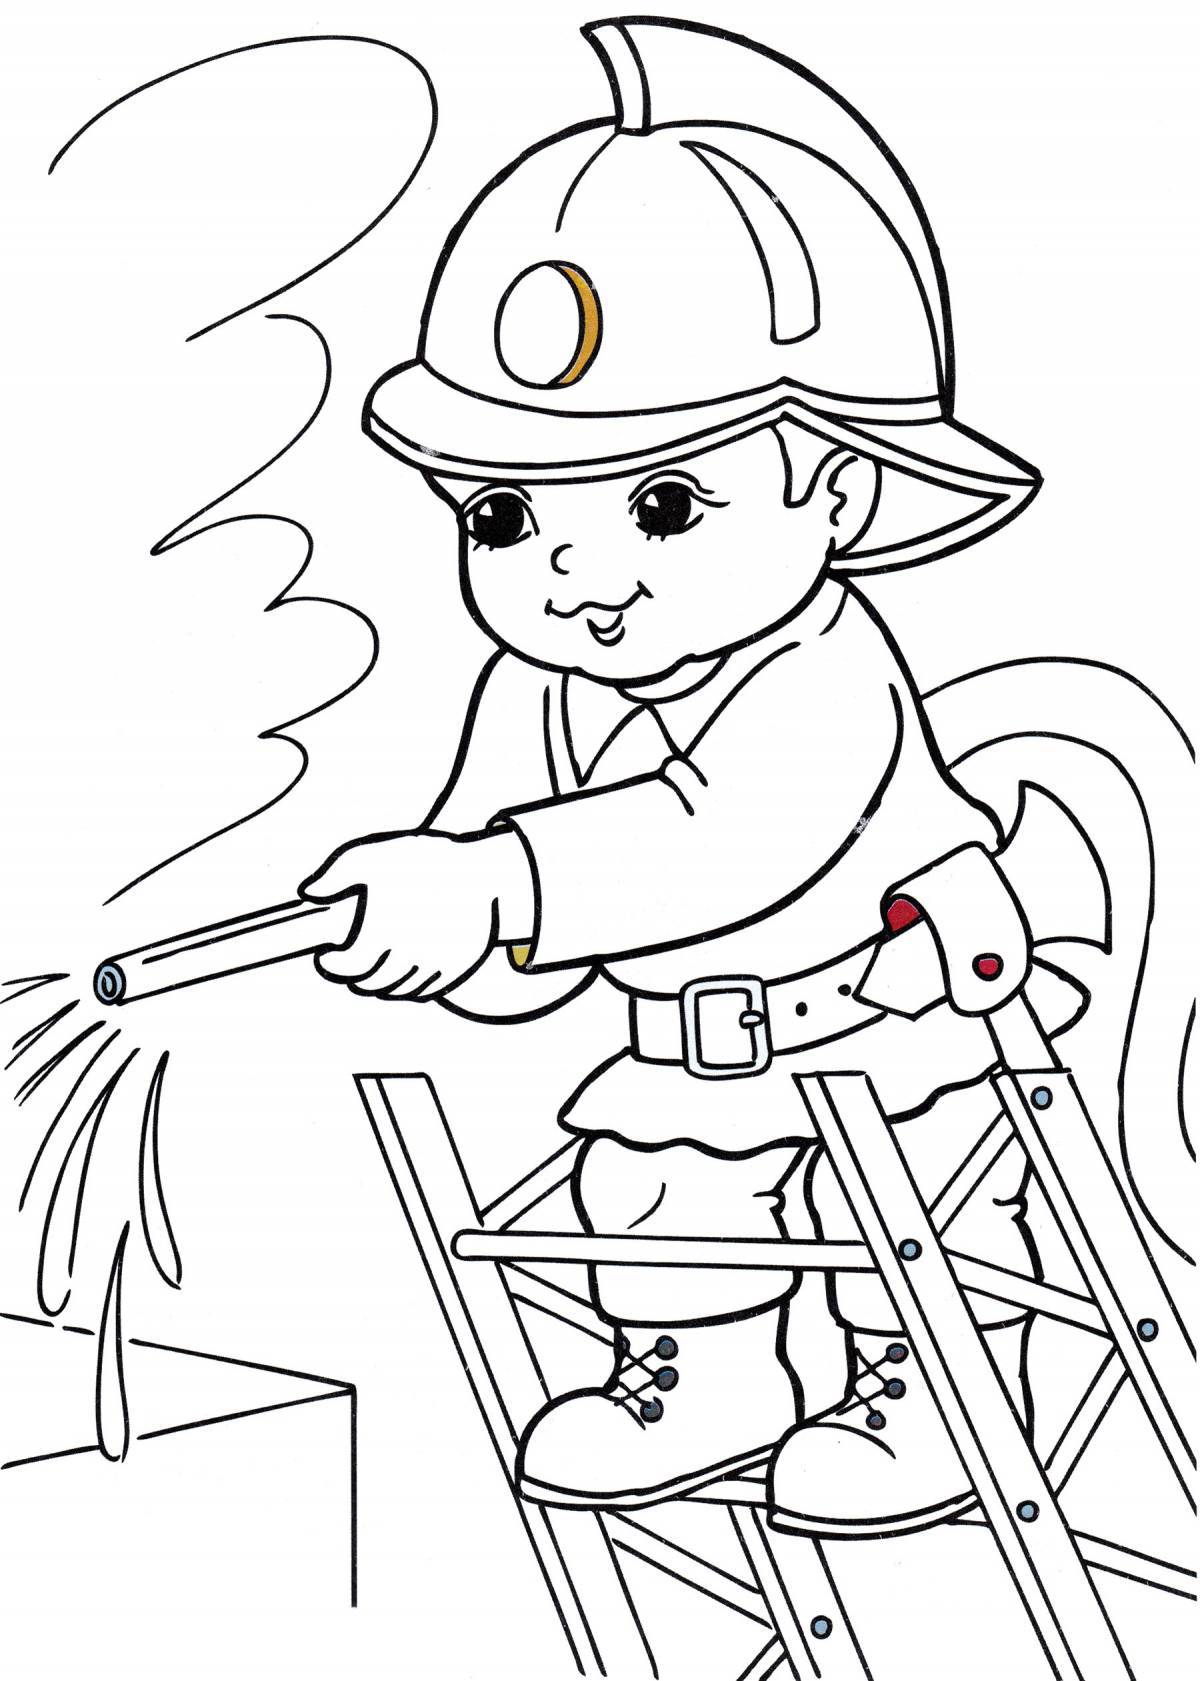 Colourful coloring pages of professions for children 6-7 years old